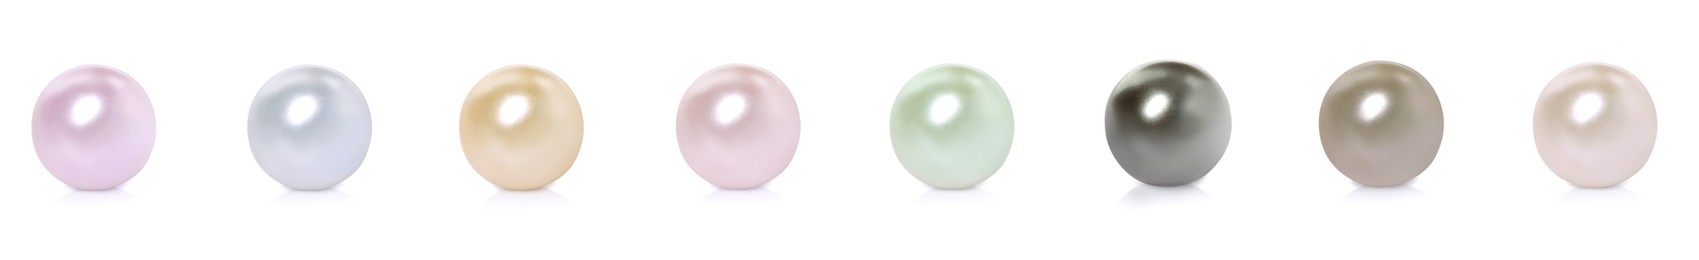 Set with beautiful pearls on white background. Banner design